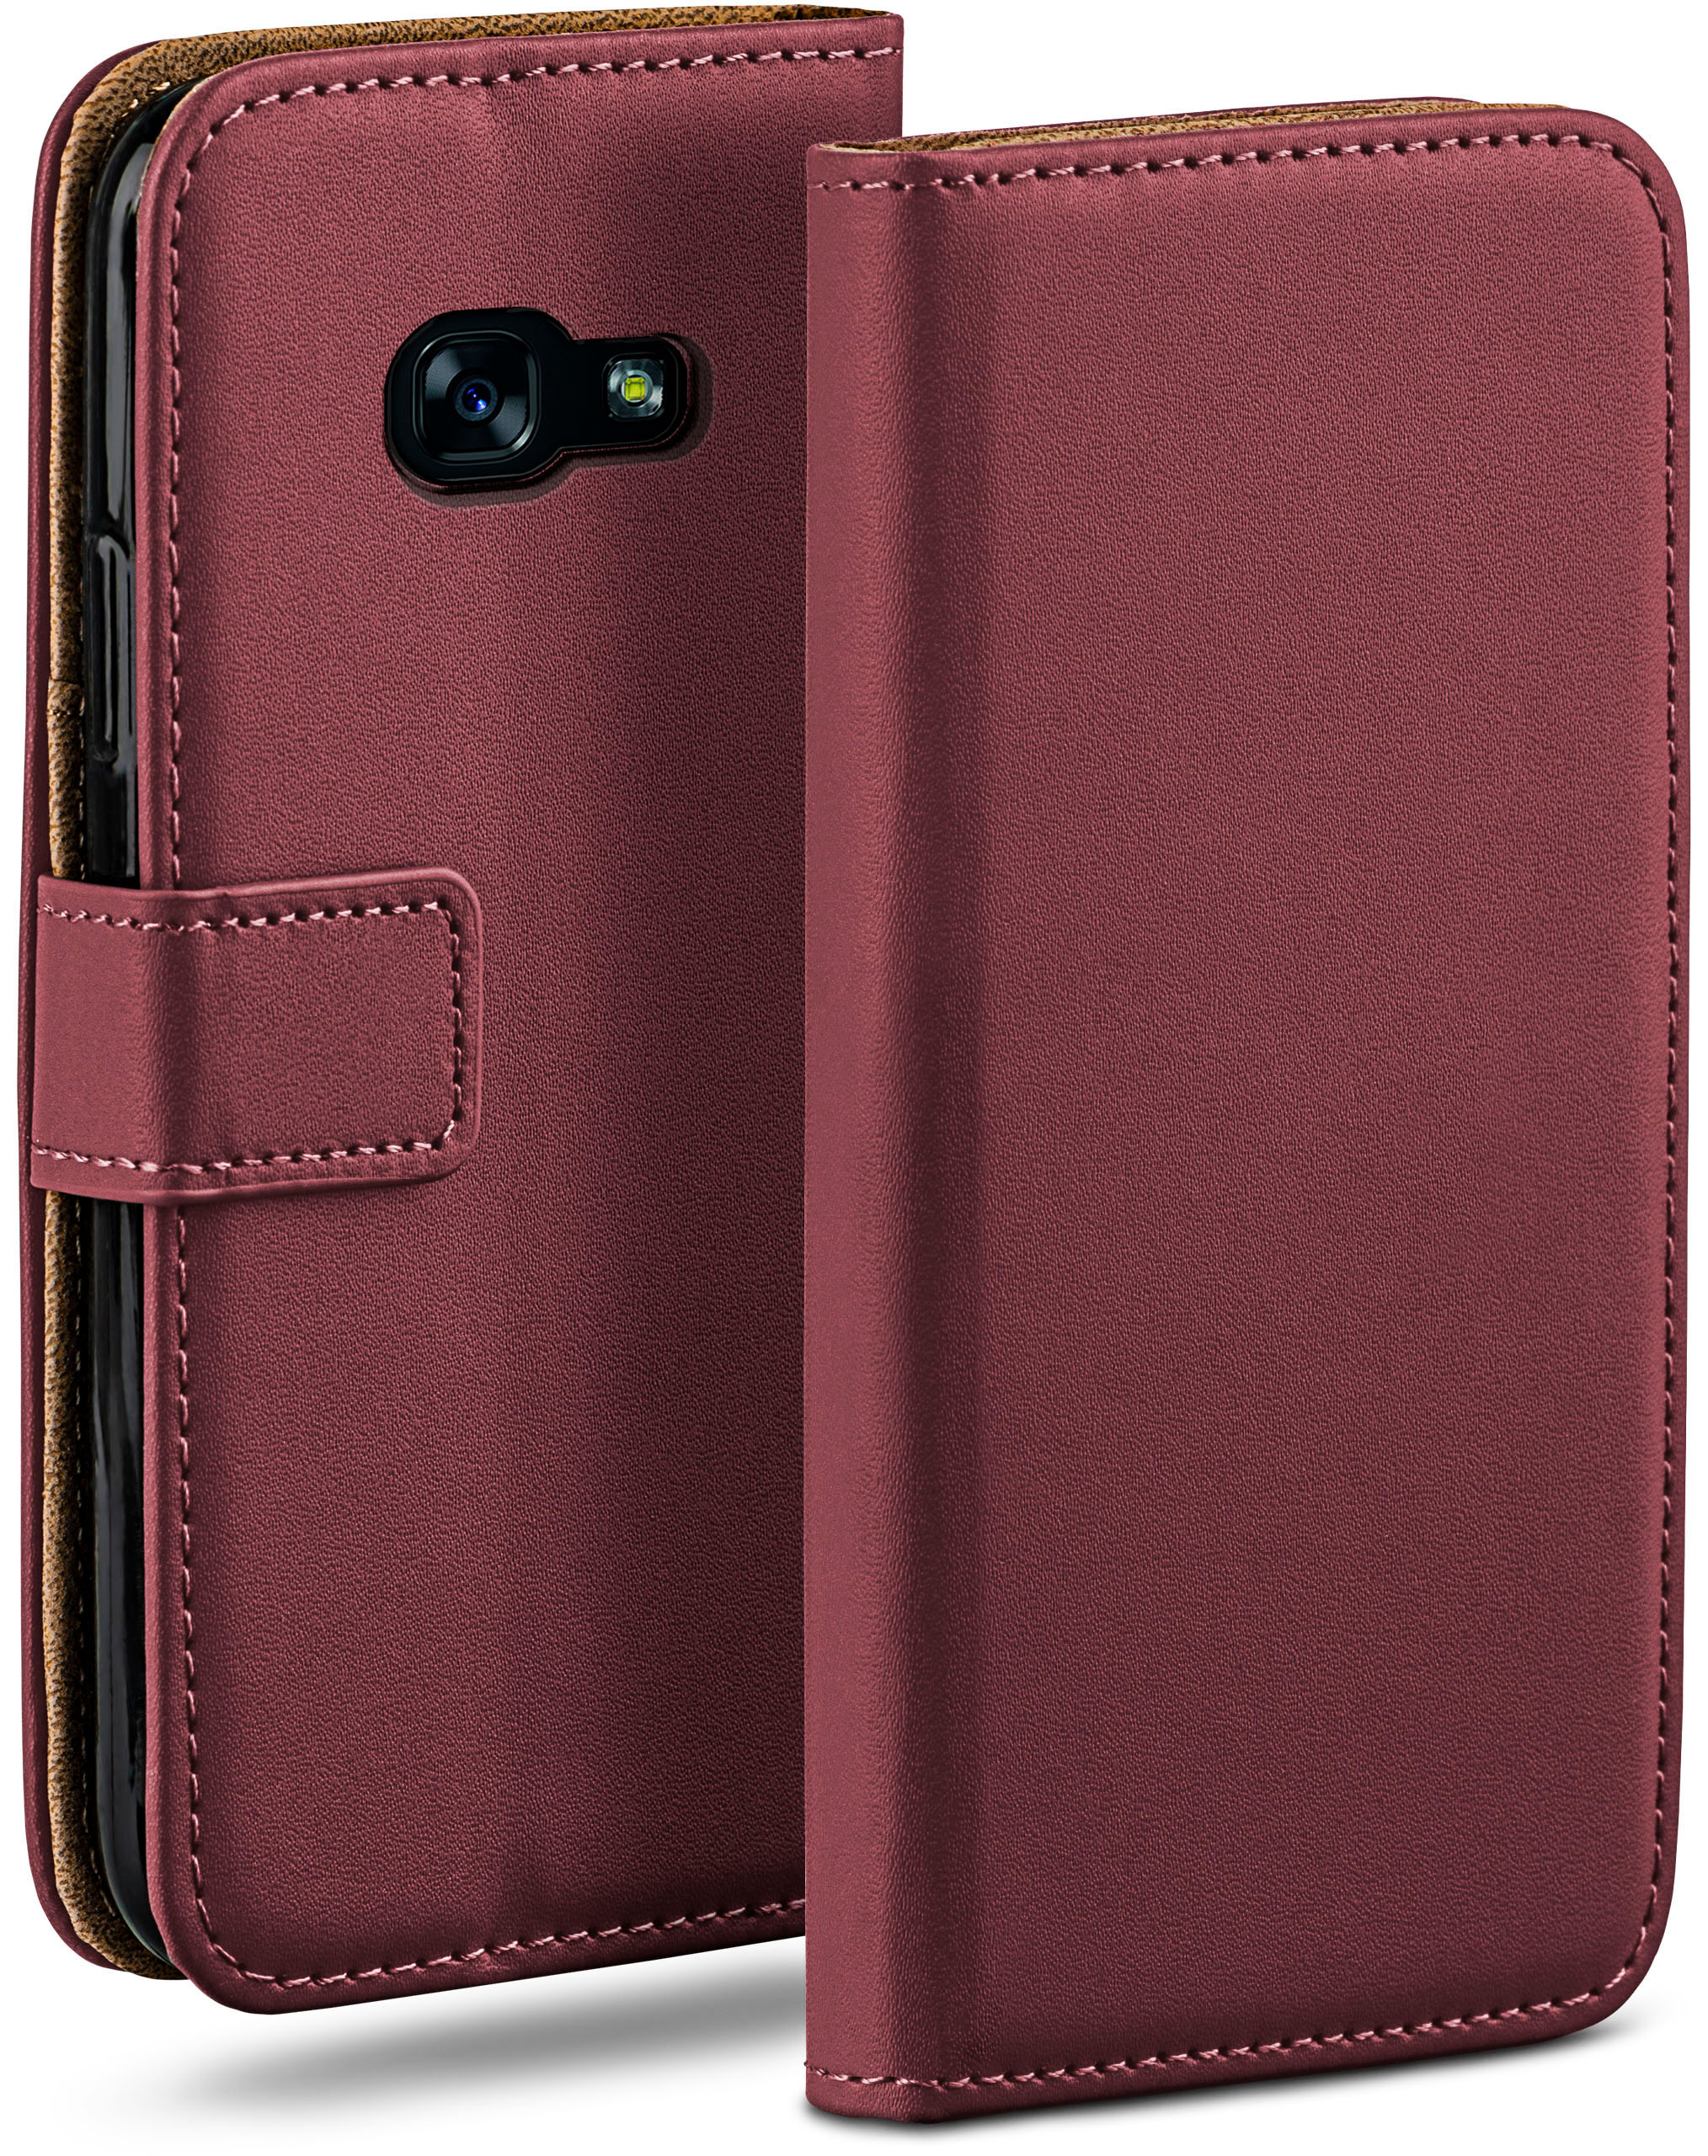 Bookcover, Book Maroon-Red (2017), MOEX A5 Galaxy Samsung, Case,